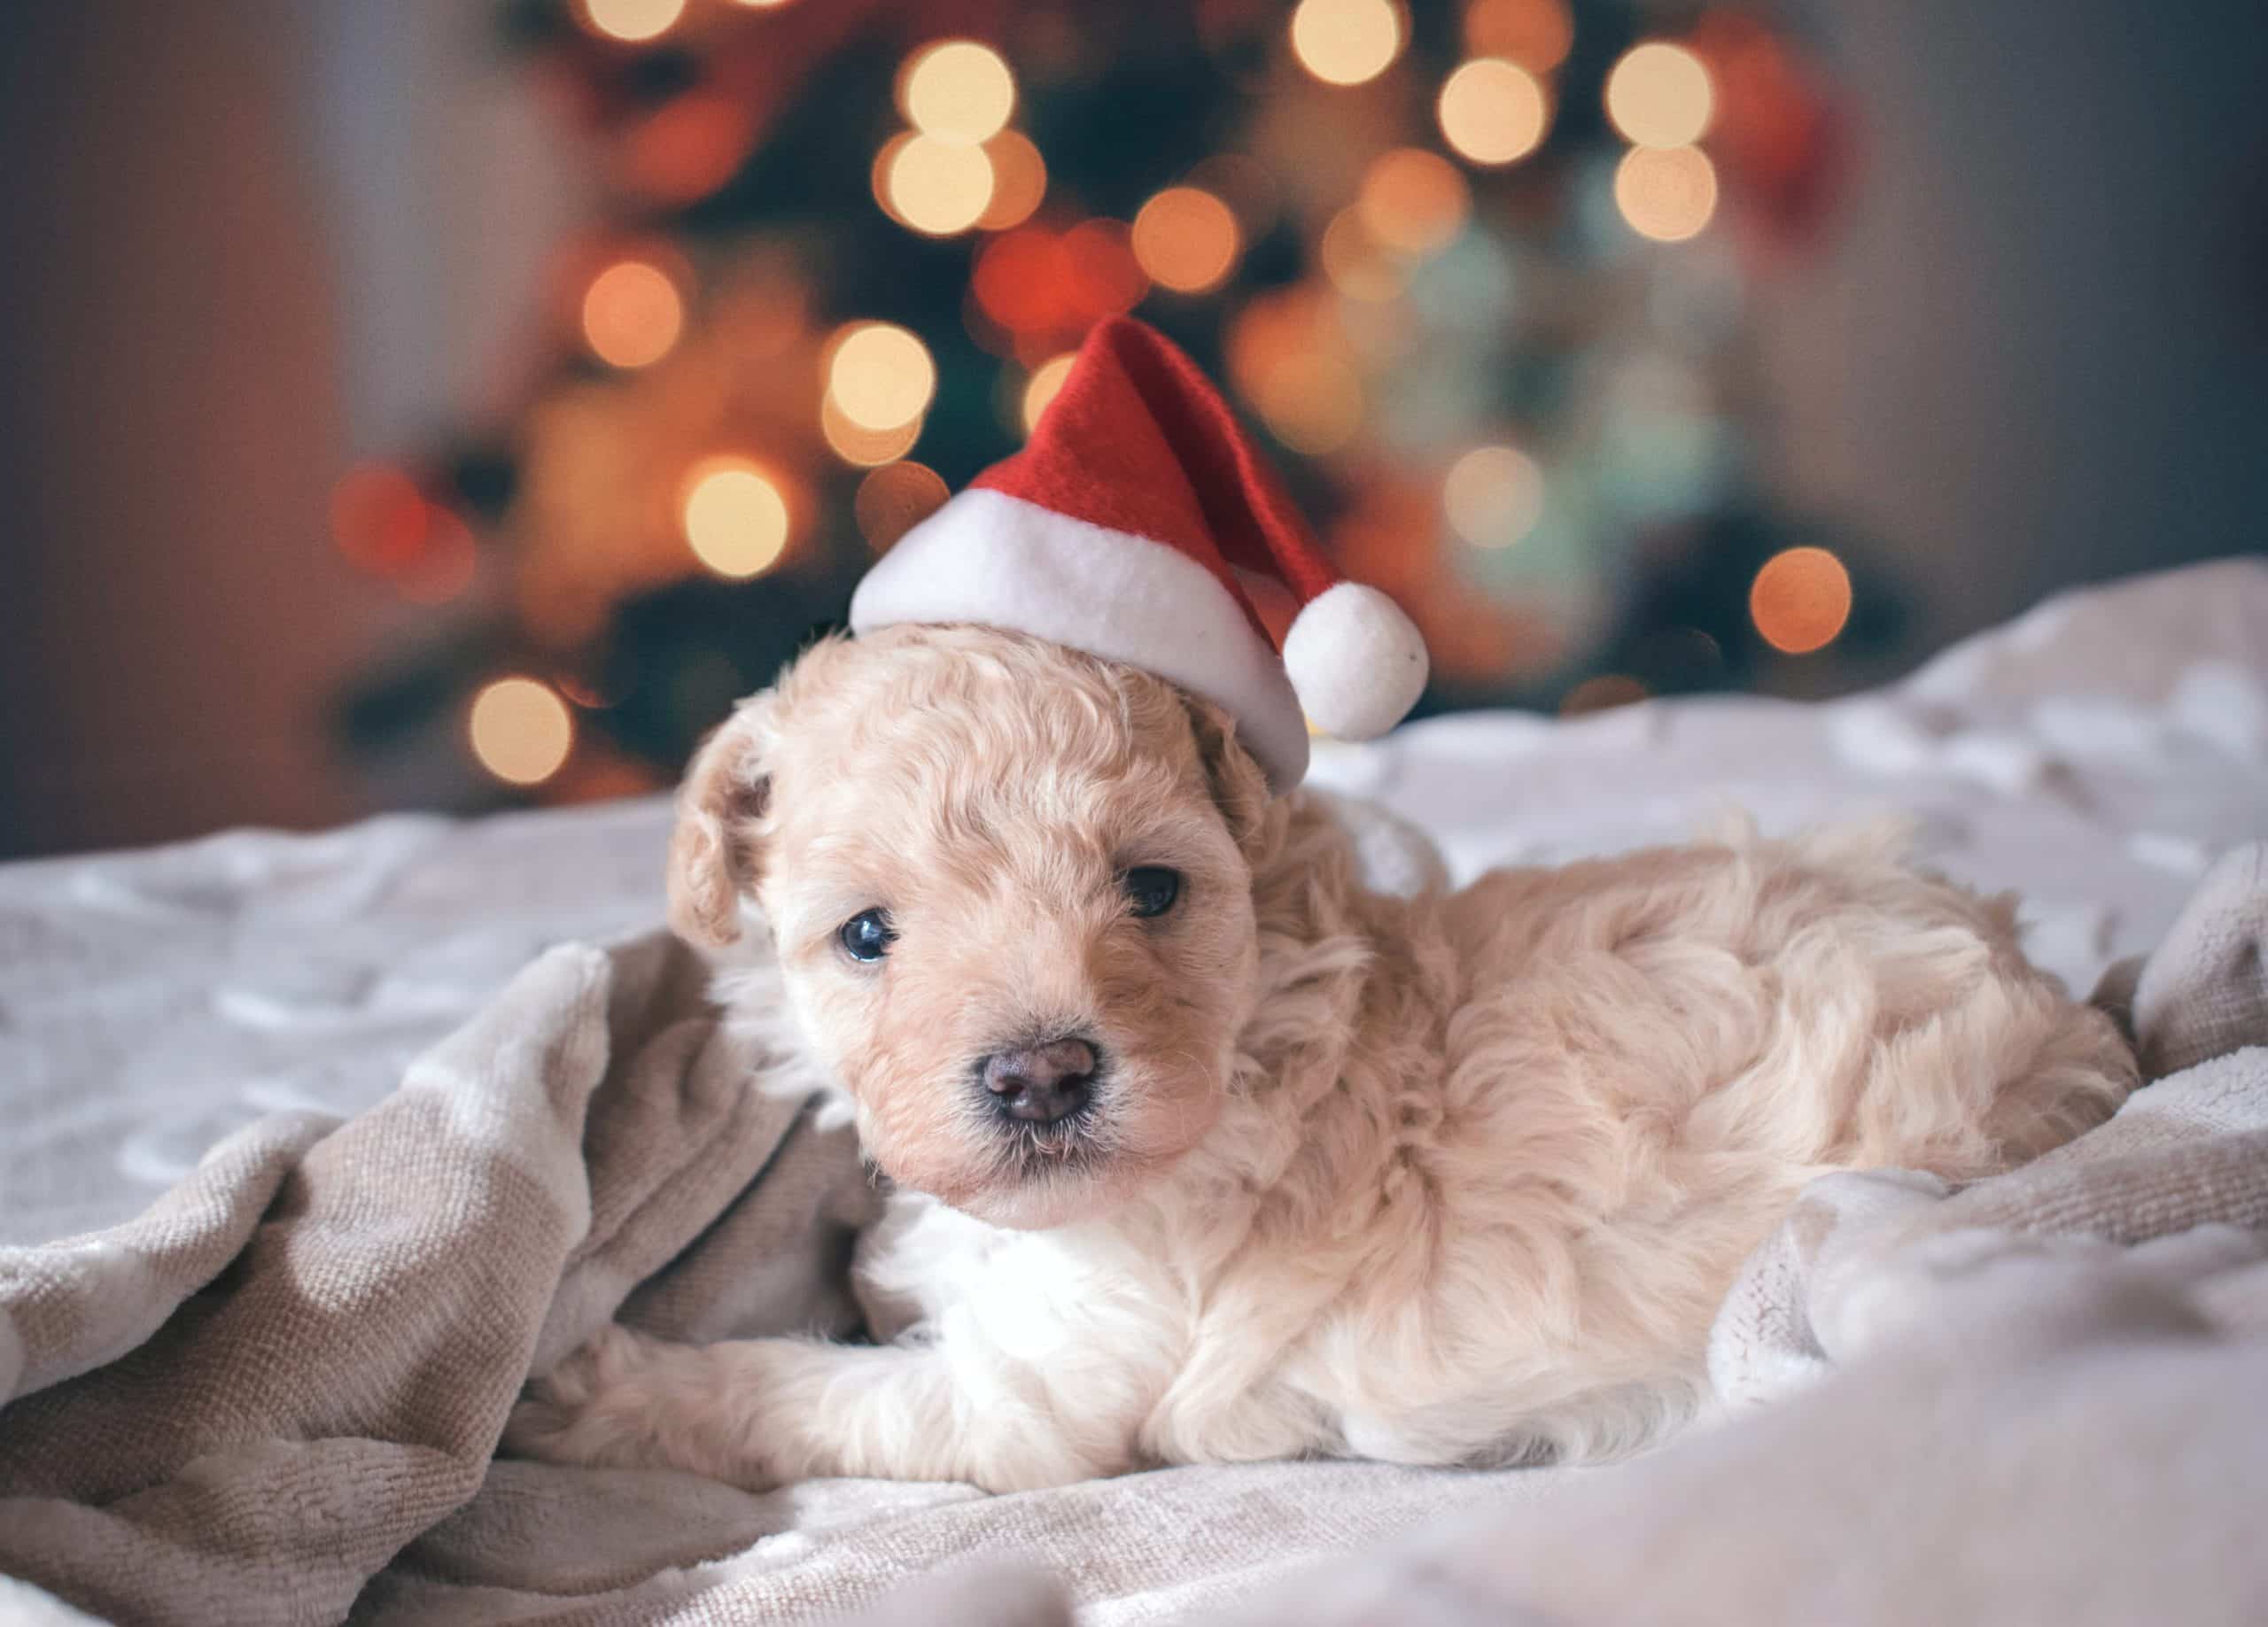 With a tiny red Christmas hat on, this adorable puppy is lying on a bed and looking directly at the camera.